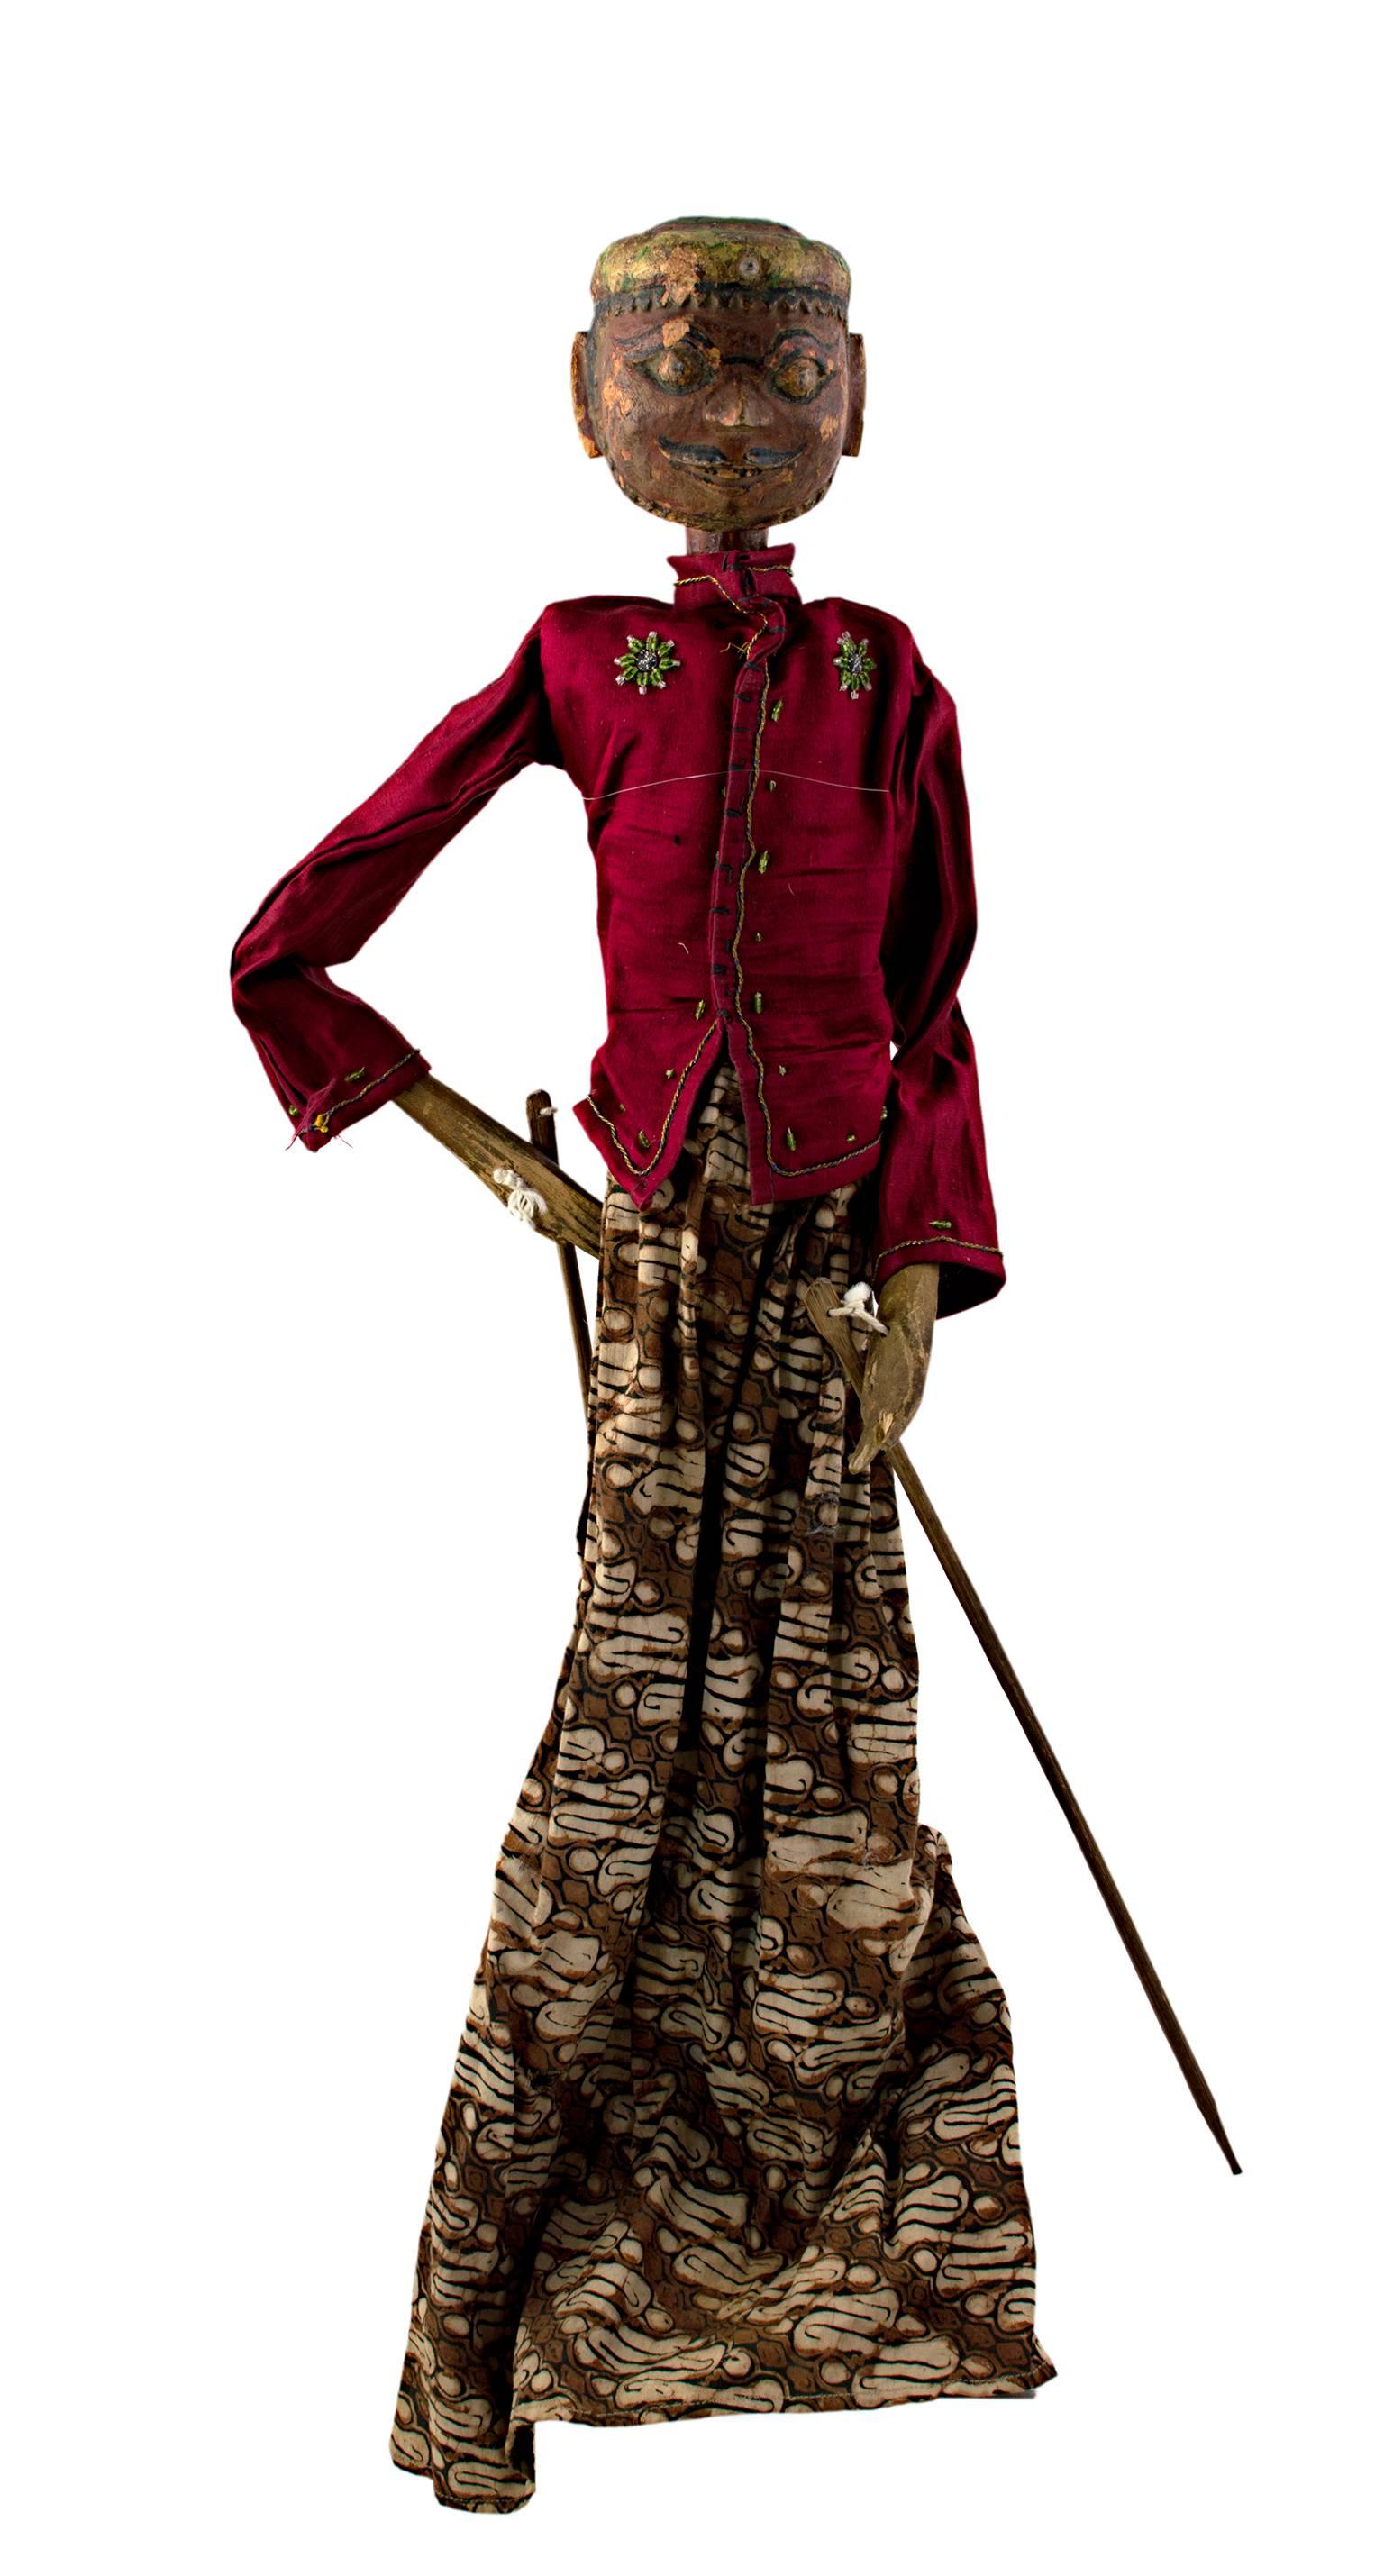 Unknown Figurative Sculpture - "Indonesian Golek Puppet (Male), " Handmade with Carved, Painted Wood and Fabric